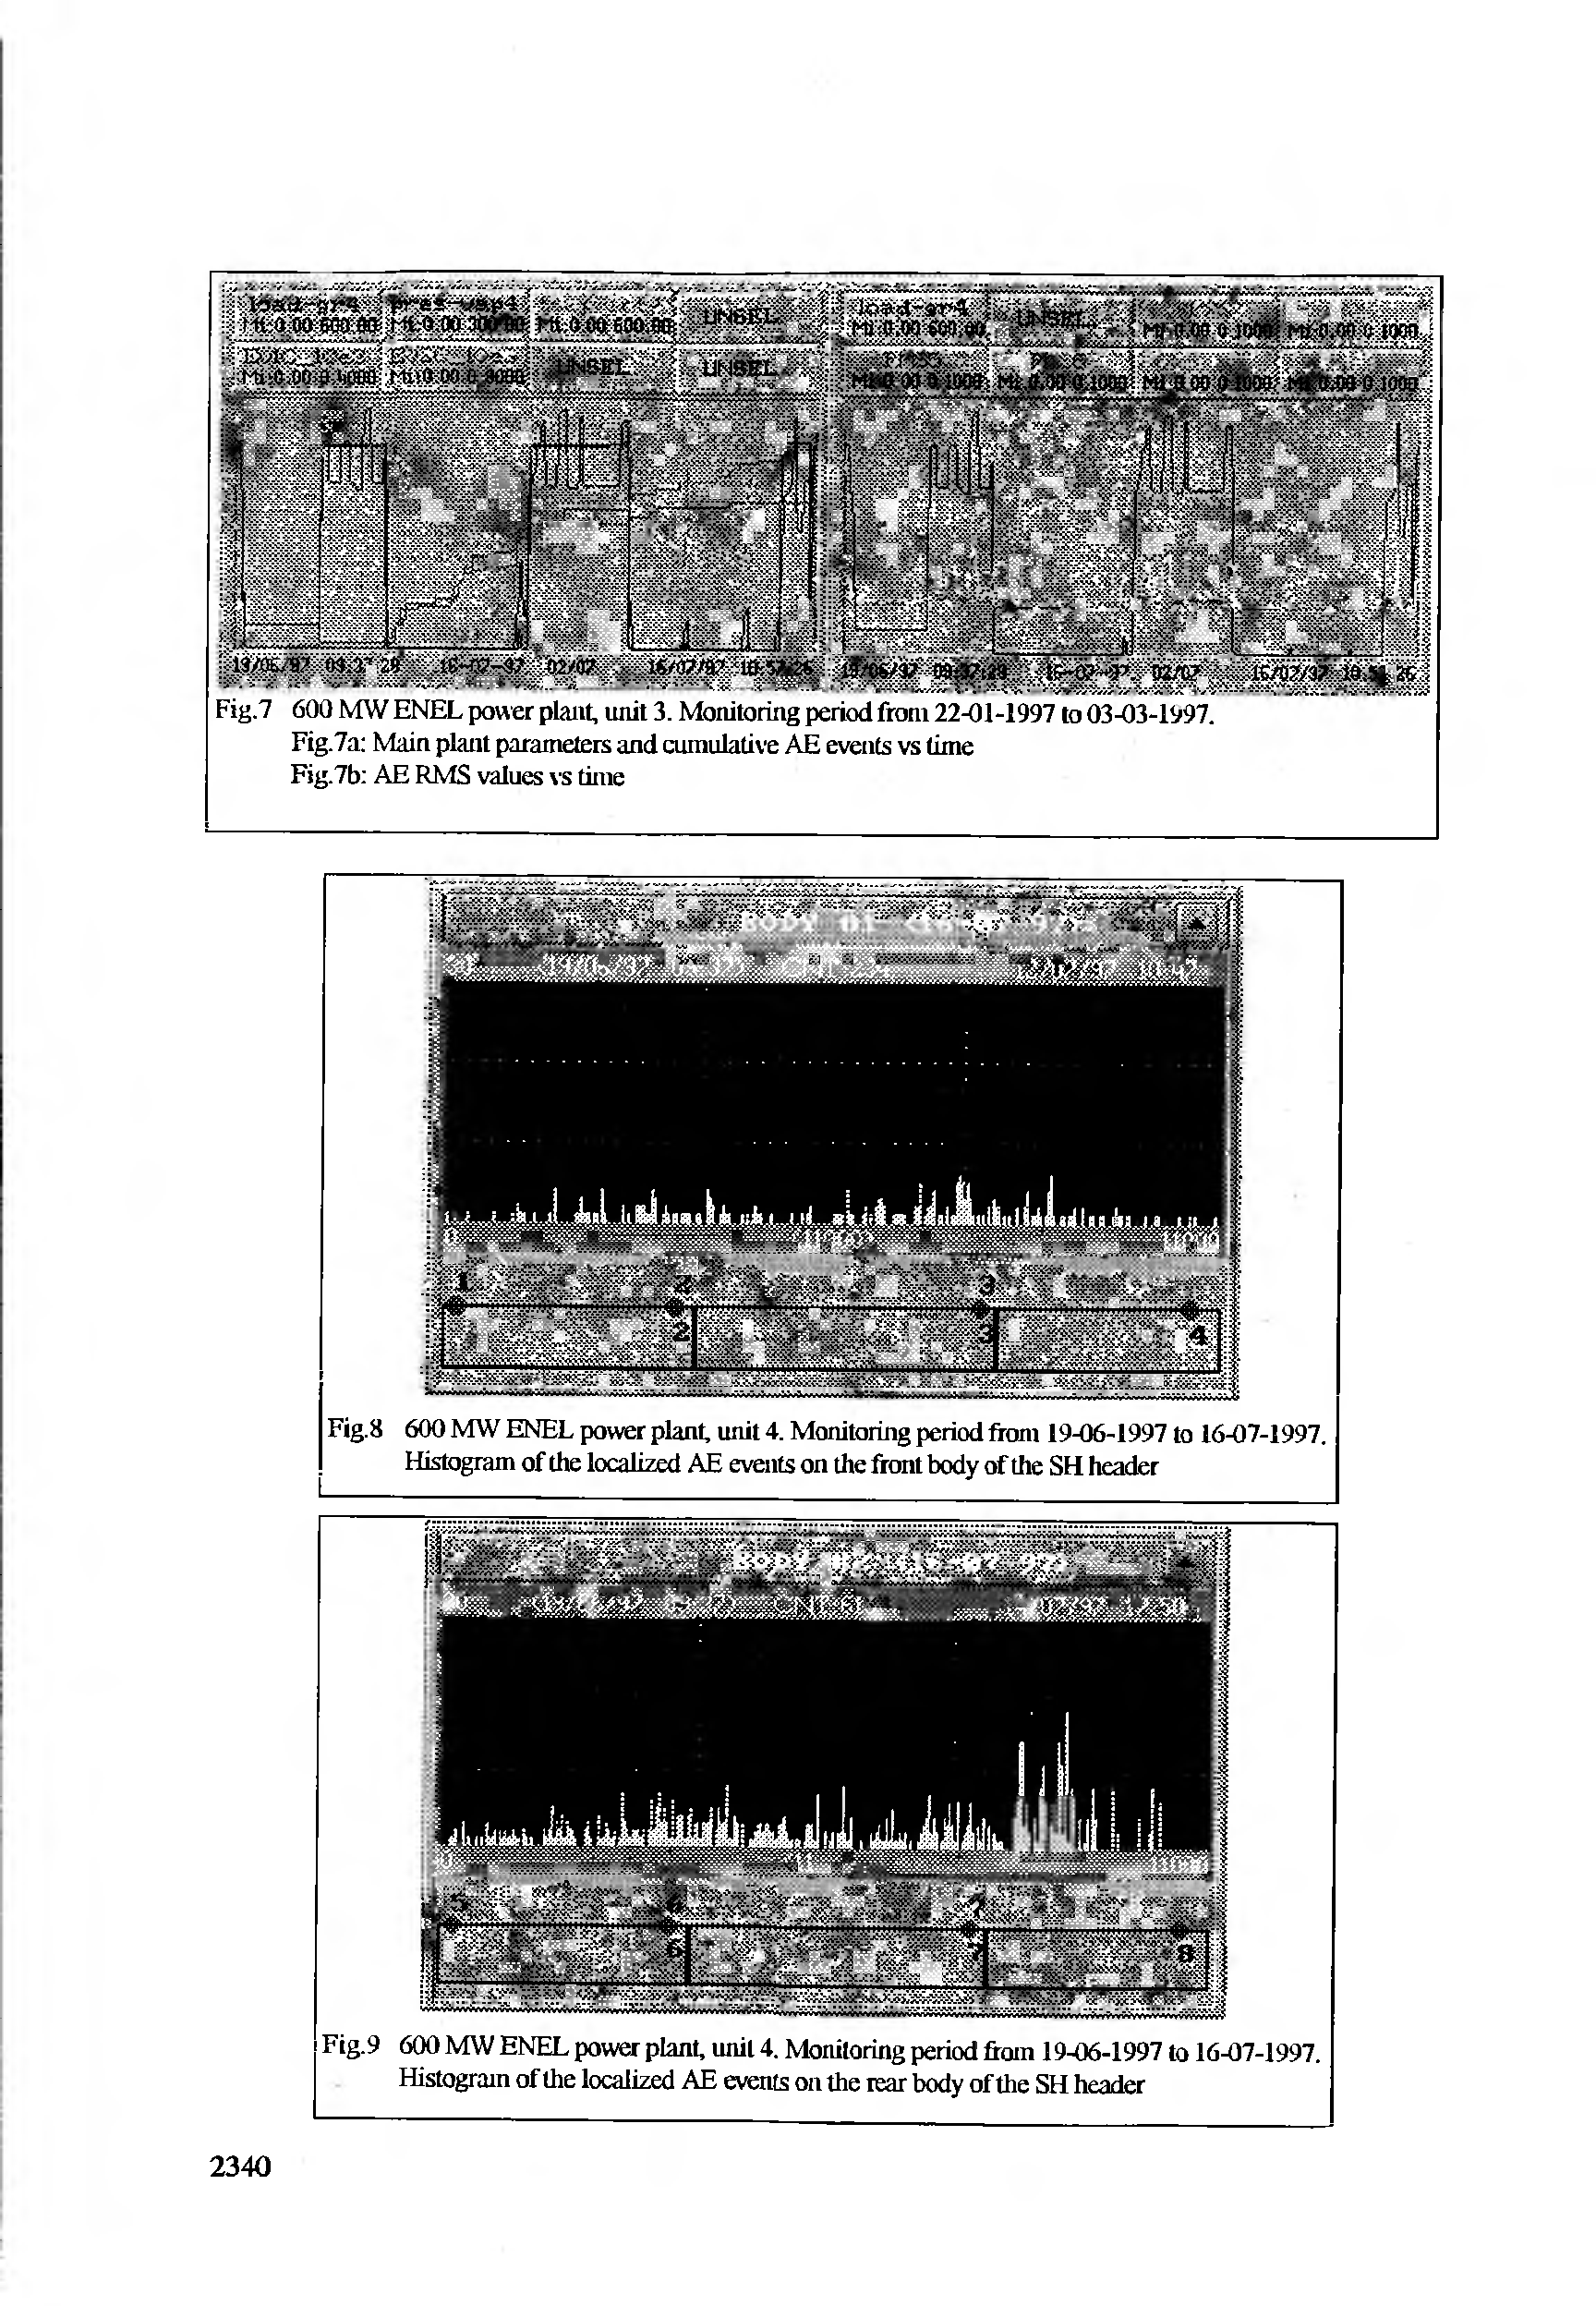 Fig.8 600 MW ENEL power plant, unit 4. Monitoring period fttmt 19-06-1997 to 16-07-1997. Histogram of the localized AE events on the front body of the SH header...